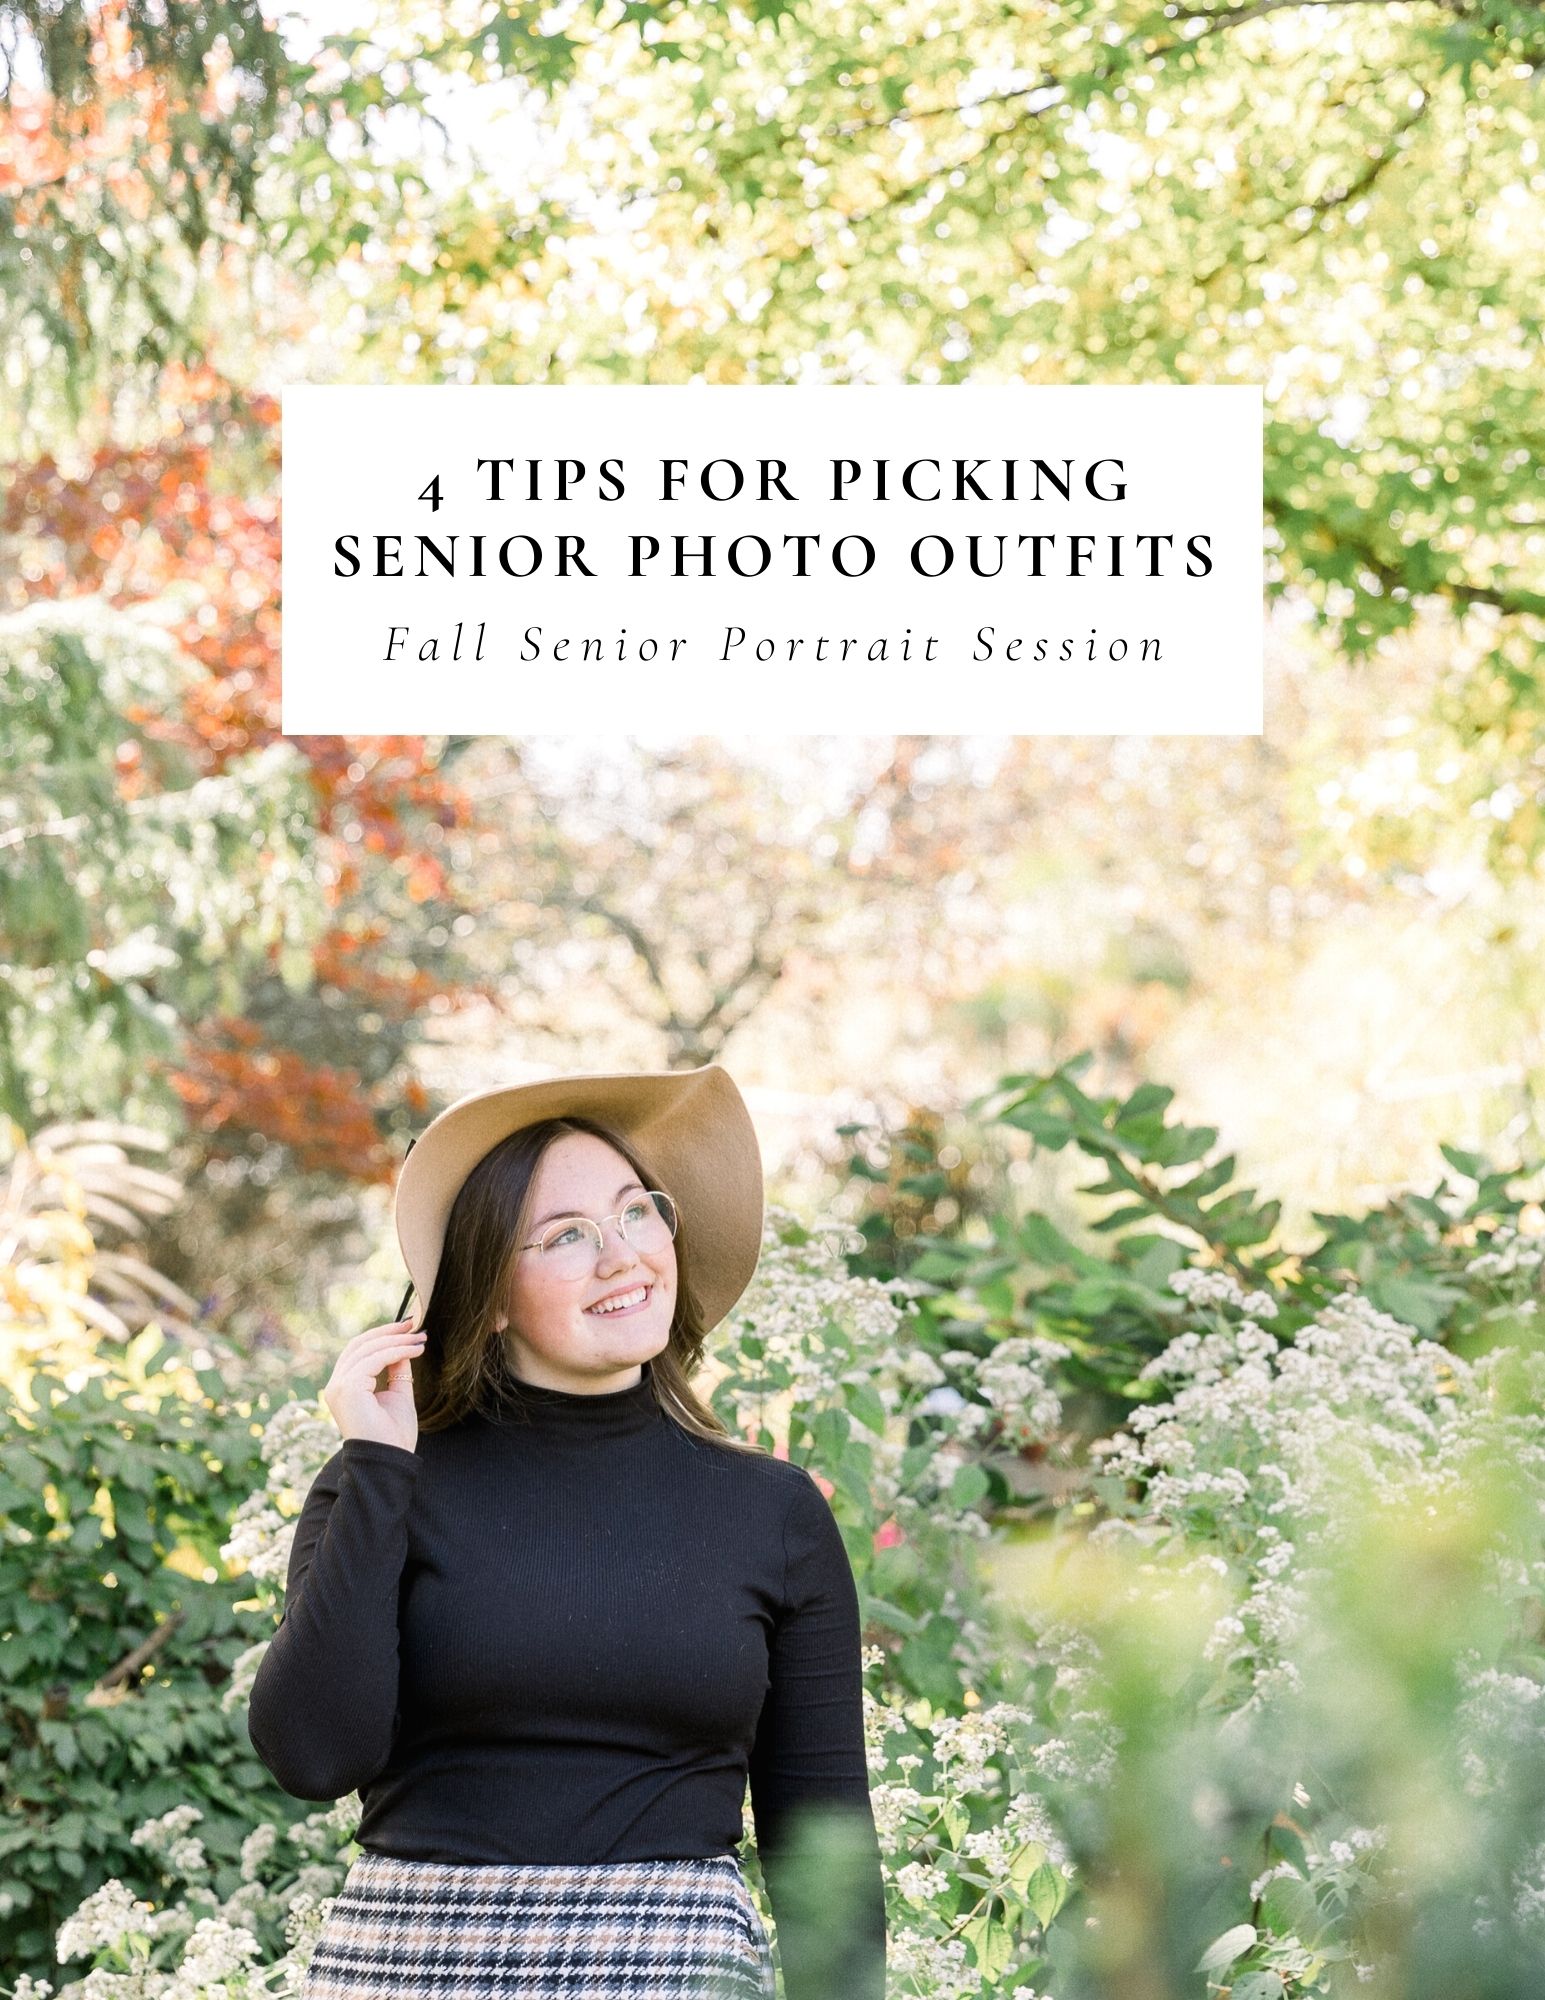 Tips for Picking Senior Photo Outfit